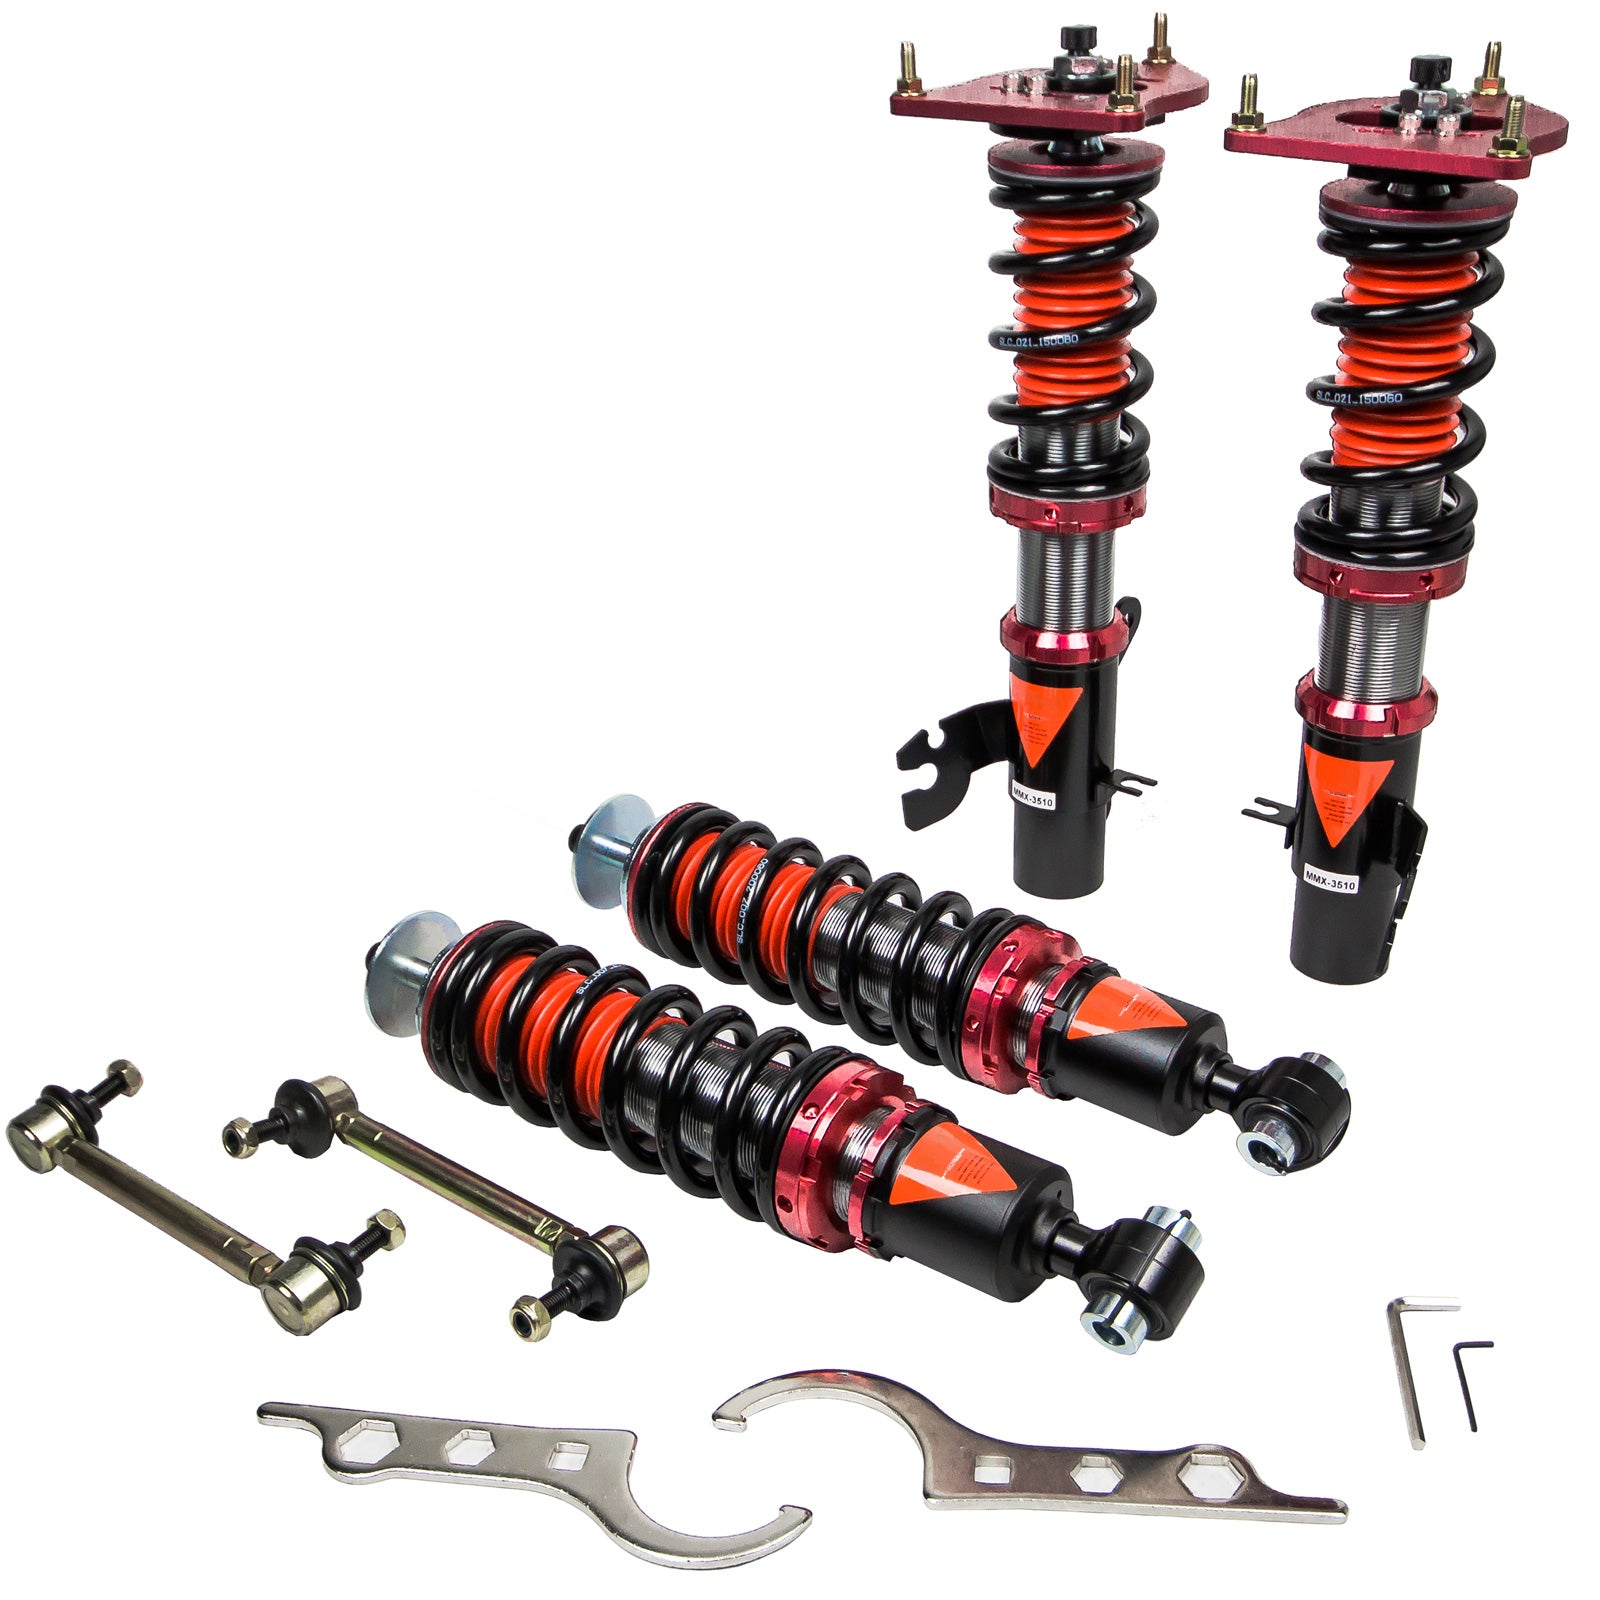 MMX3550 MAXX Coilovers Lowering Kit, Fully Adjustable, Ride Height, 40 Clicks Rebound Settings, MINI Coupe(R58)/Roadster(R59) 2012-15